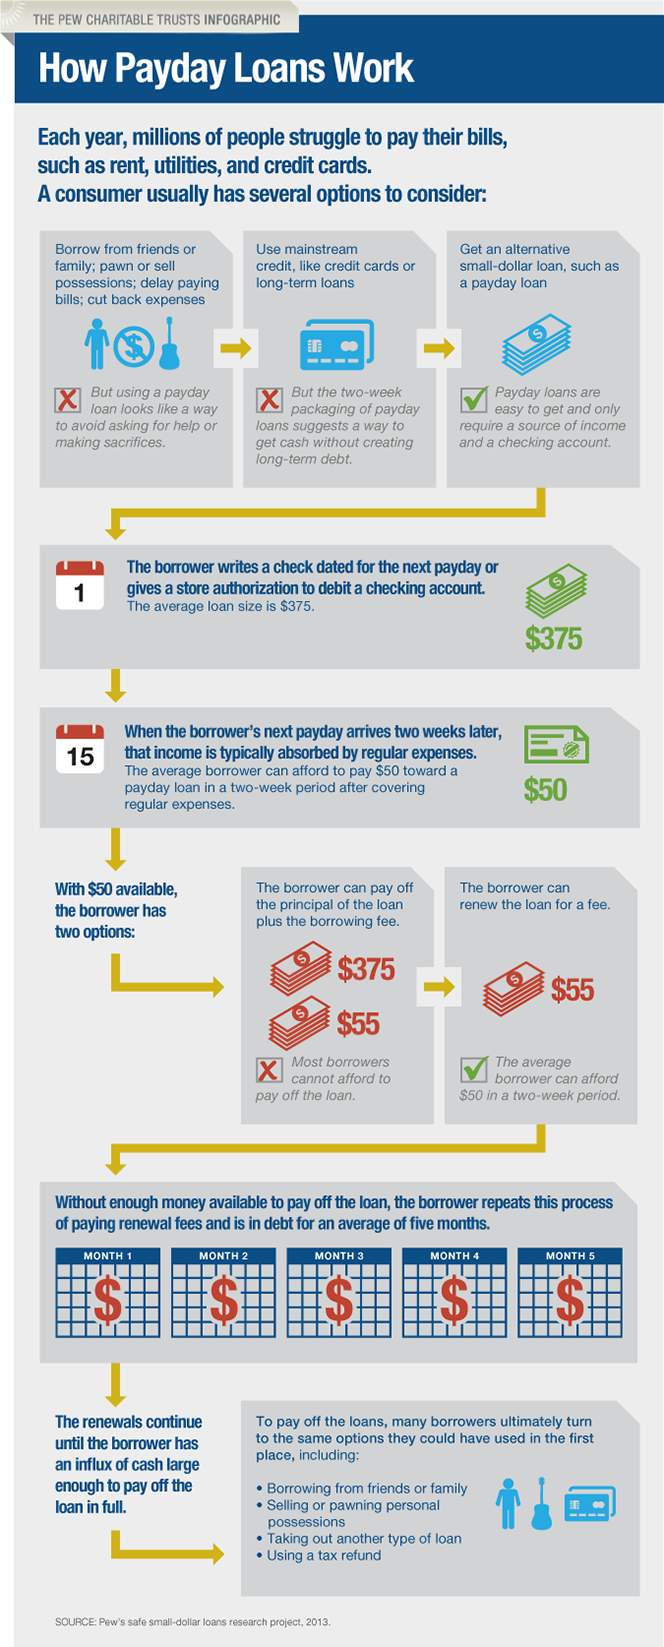 Info - How payday loans work